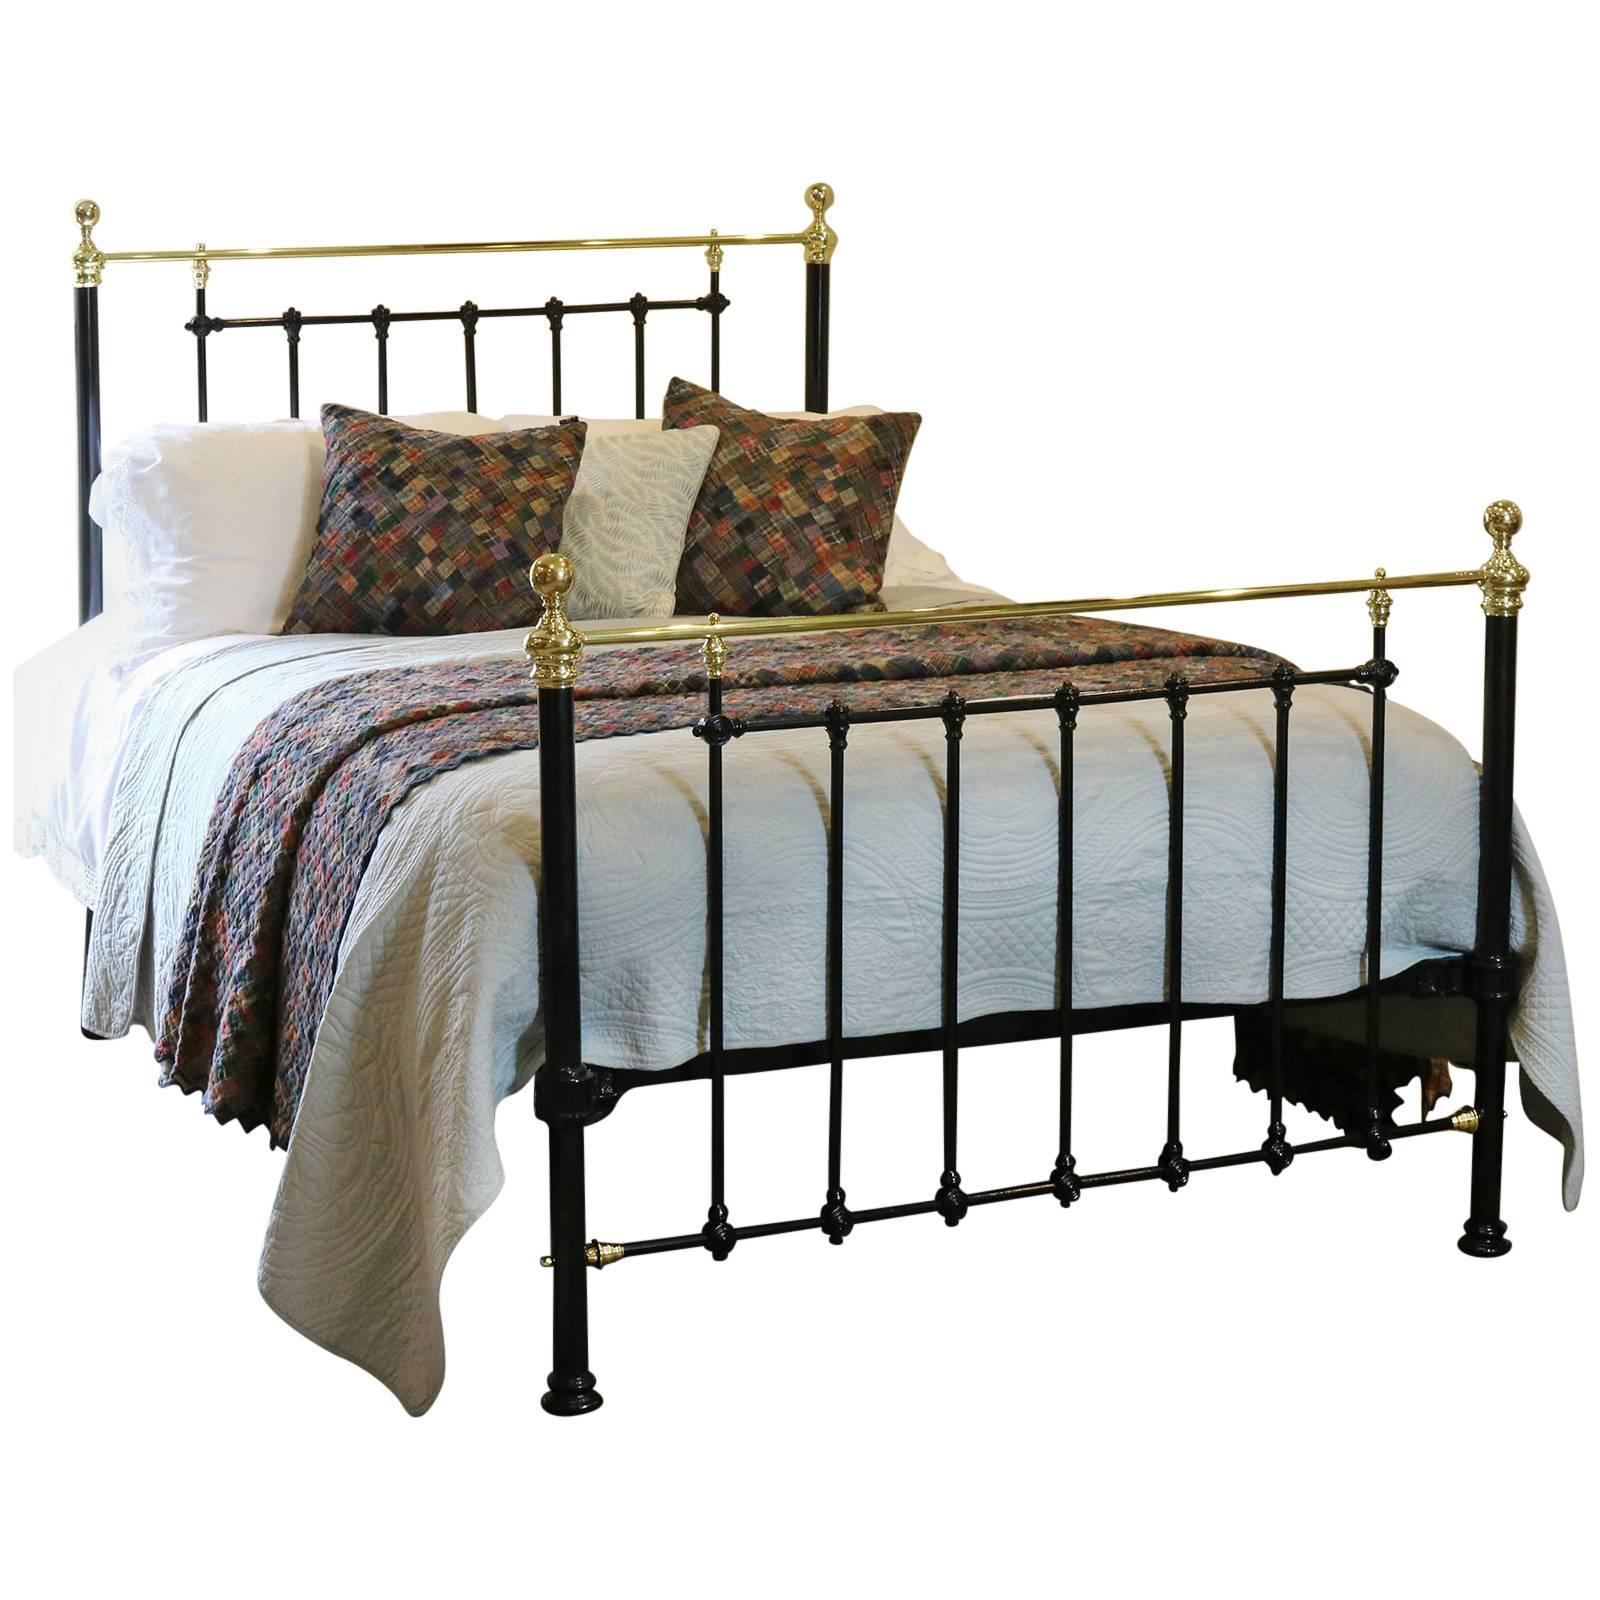 Wide Classical Victorian Iron Bed